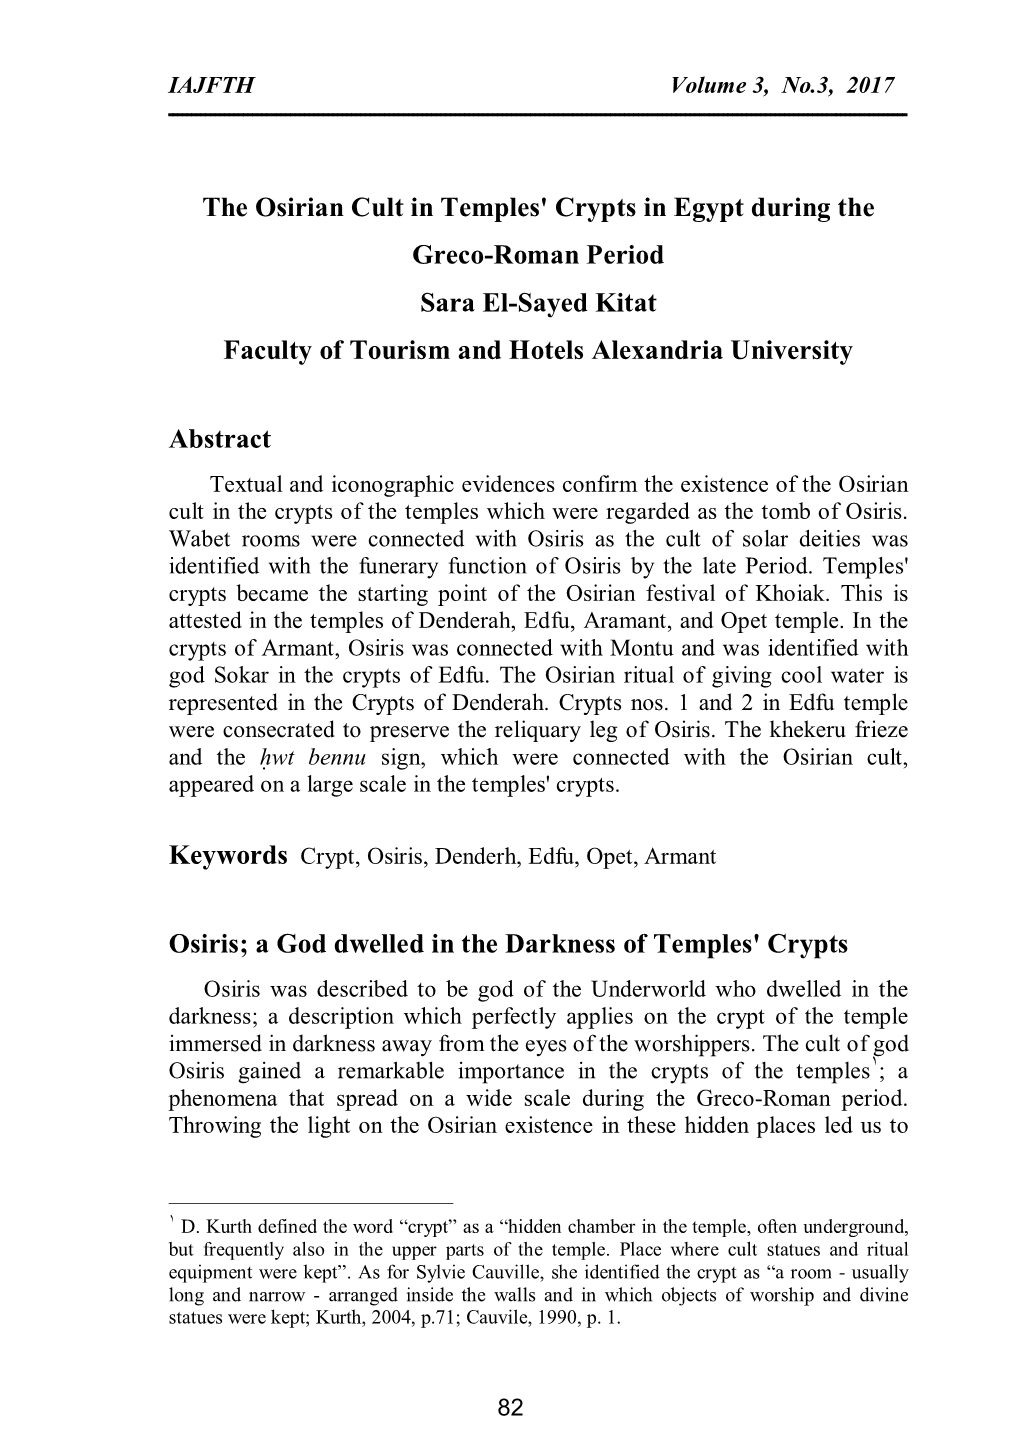 The Osirian Cult in Temples' Crypts in Egypt During the Greco-Roman Period Sara El-Sayed Kitat Faculty of Tourism and Hotels Alexandria University